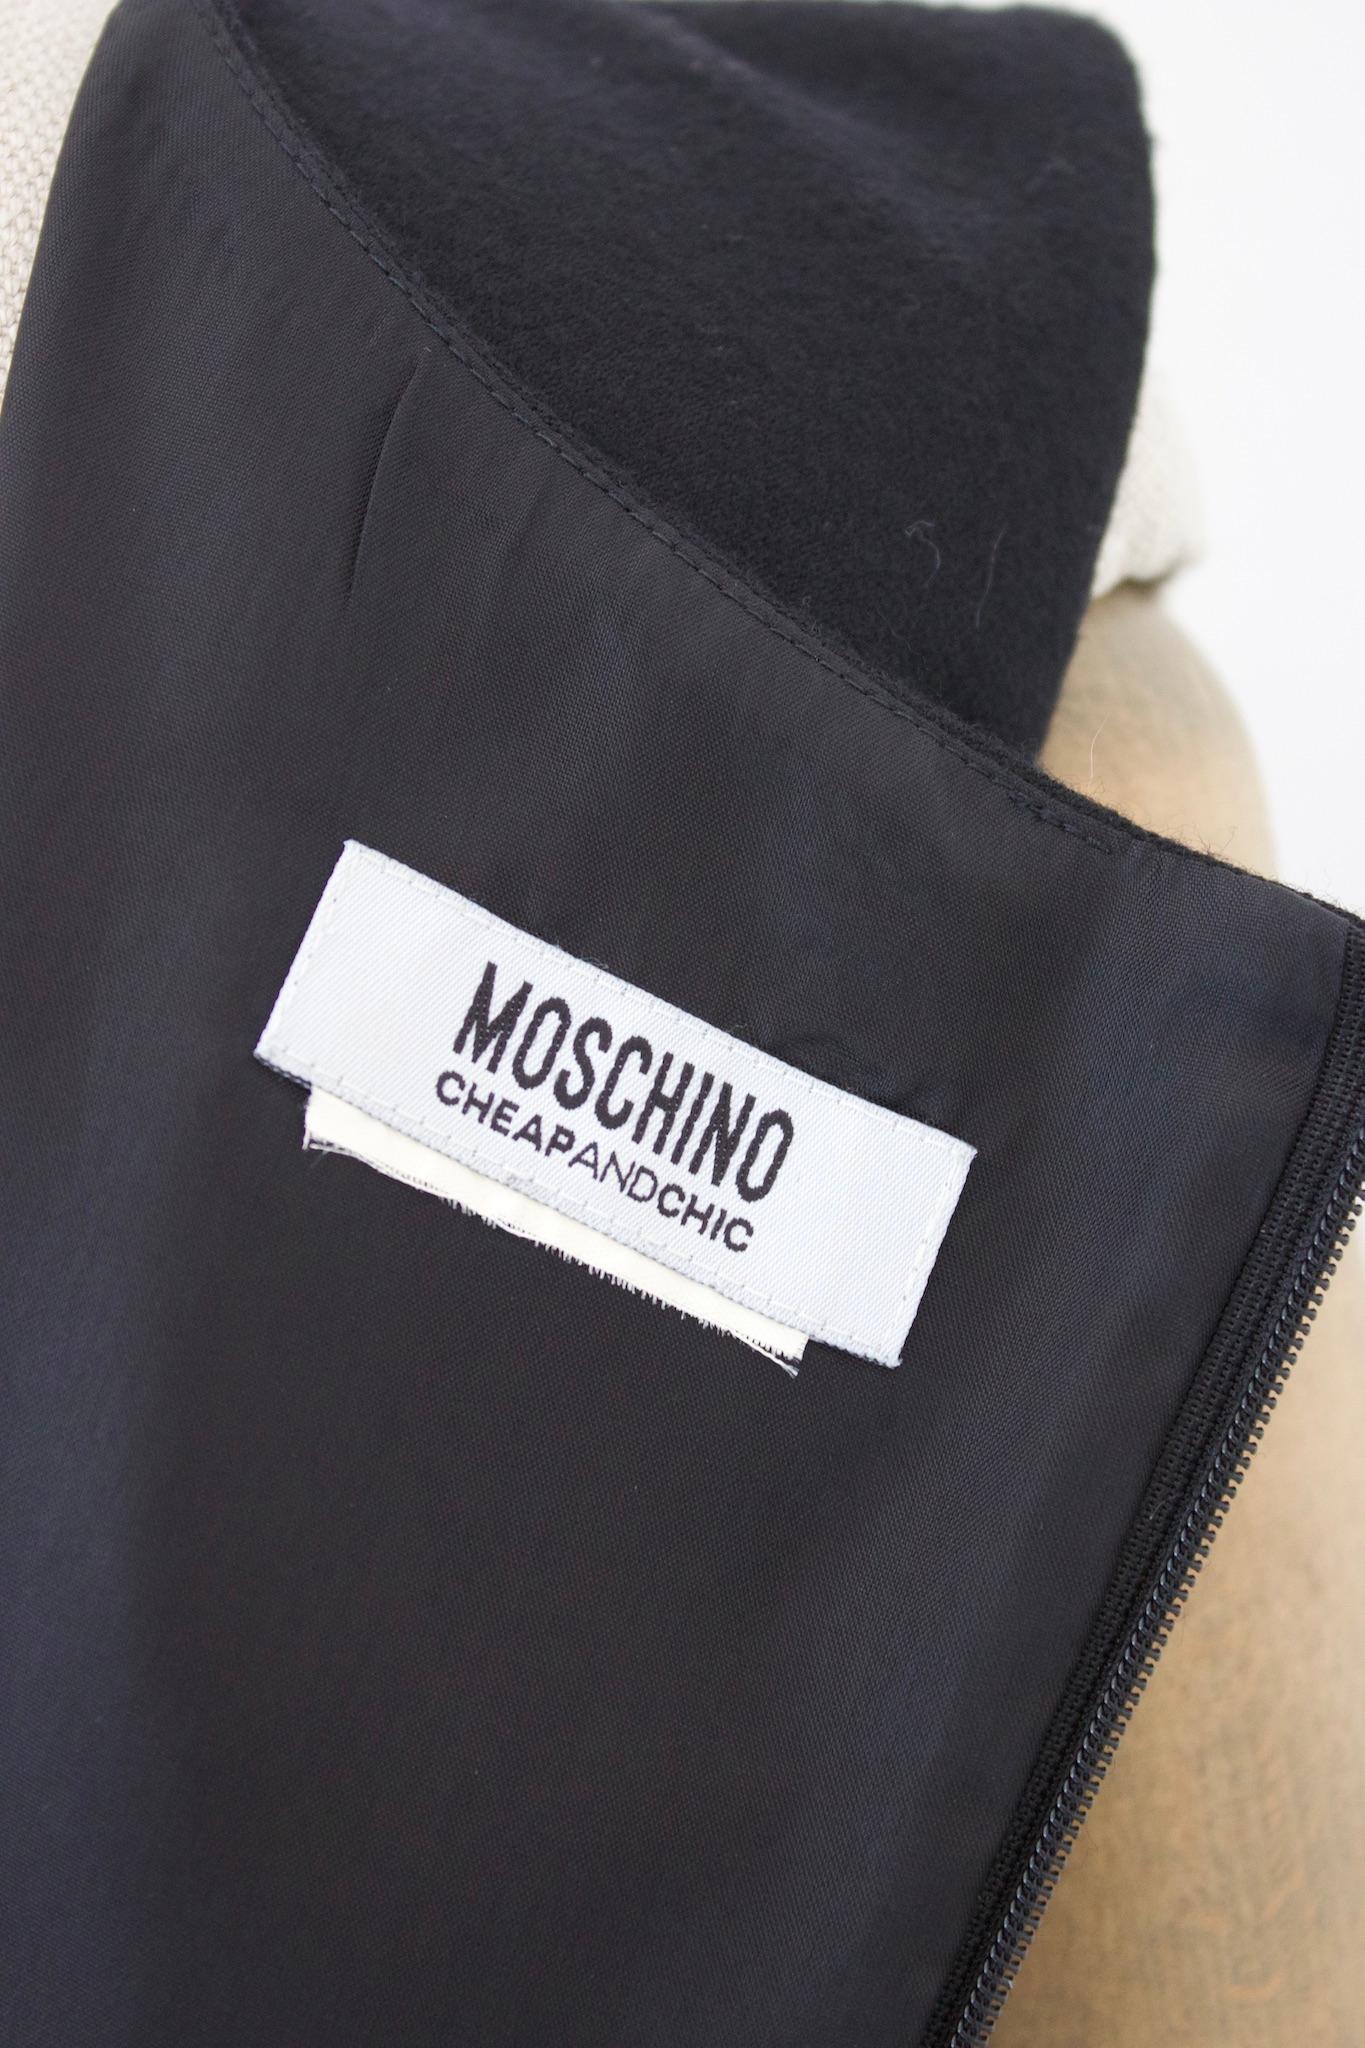 Moschino Cheap and Chic vintage 2000s black sheath dress is a timeless piece made from high-quality wool. The dress is elegant and sophisticated, with a simple yet classic design that will never go out of style. Perfect for formal occasions, this